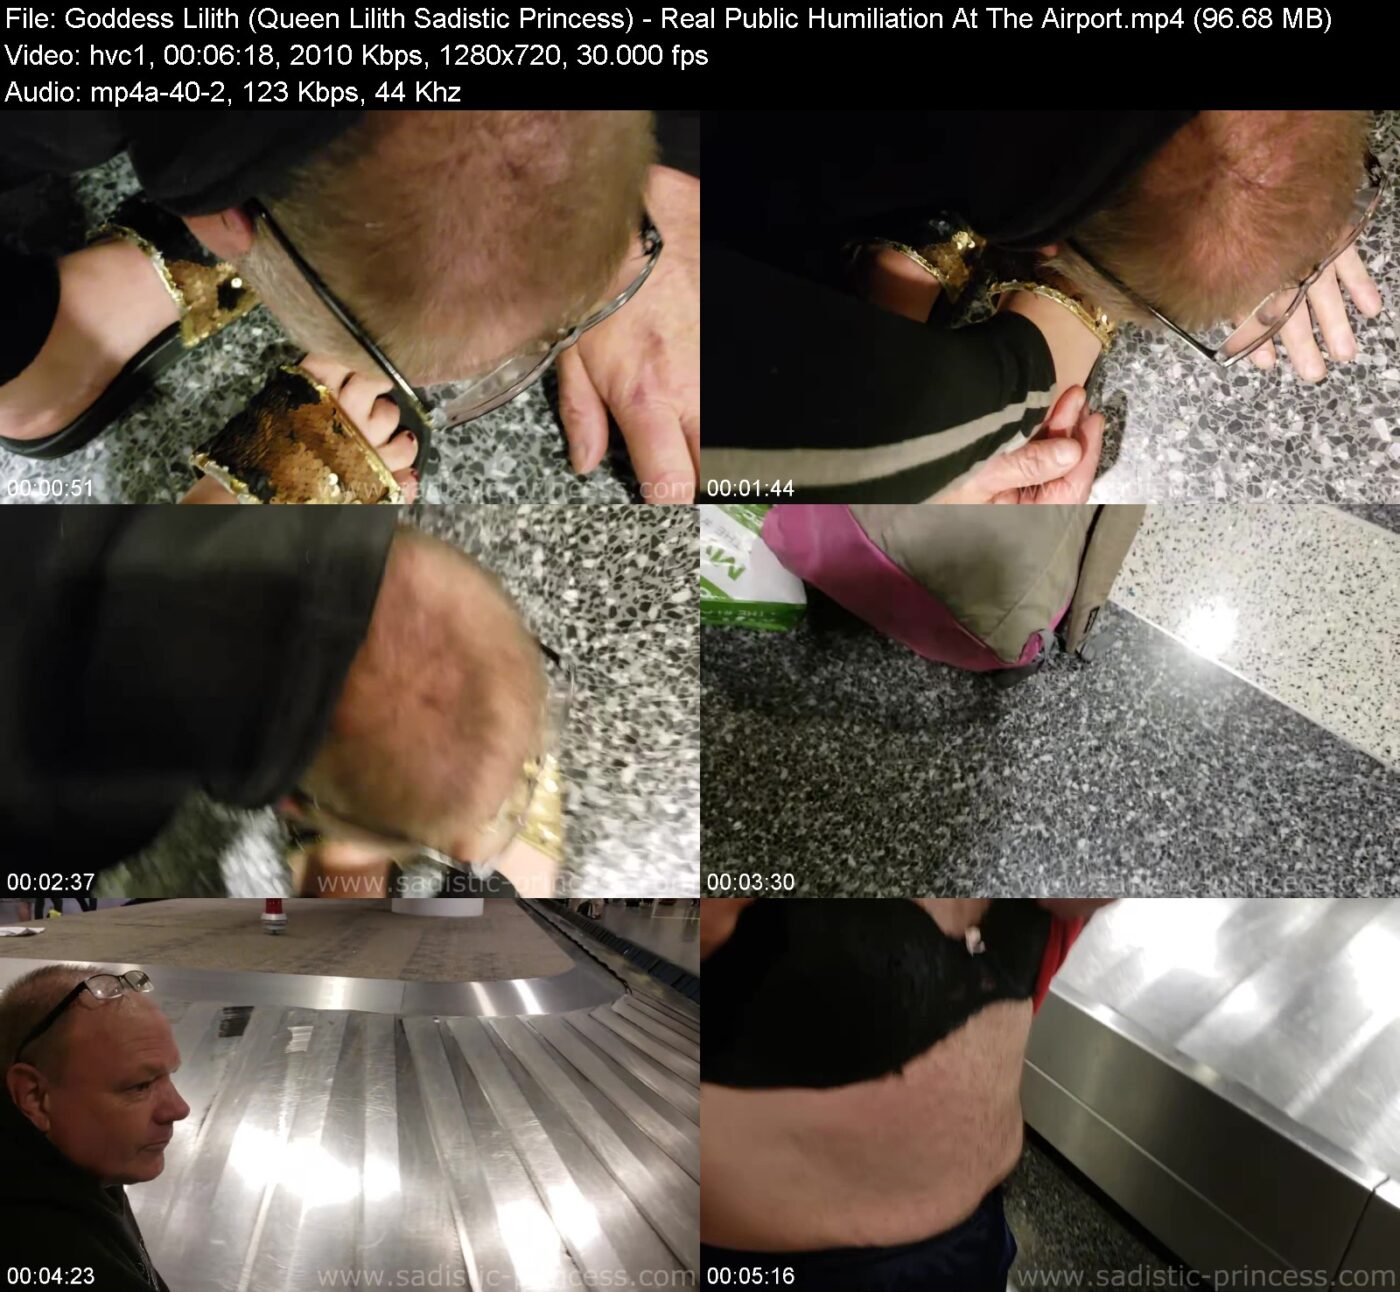 Actress: Goddess Lilith (Queen Lilith Sadistic Princess). Title and Studio: Real Public Humiliation At The Airport